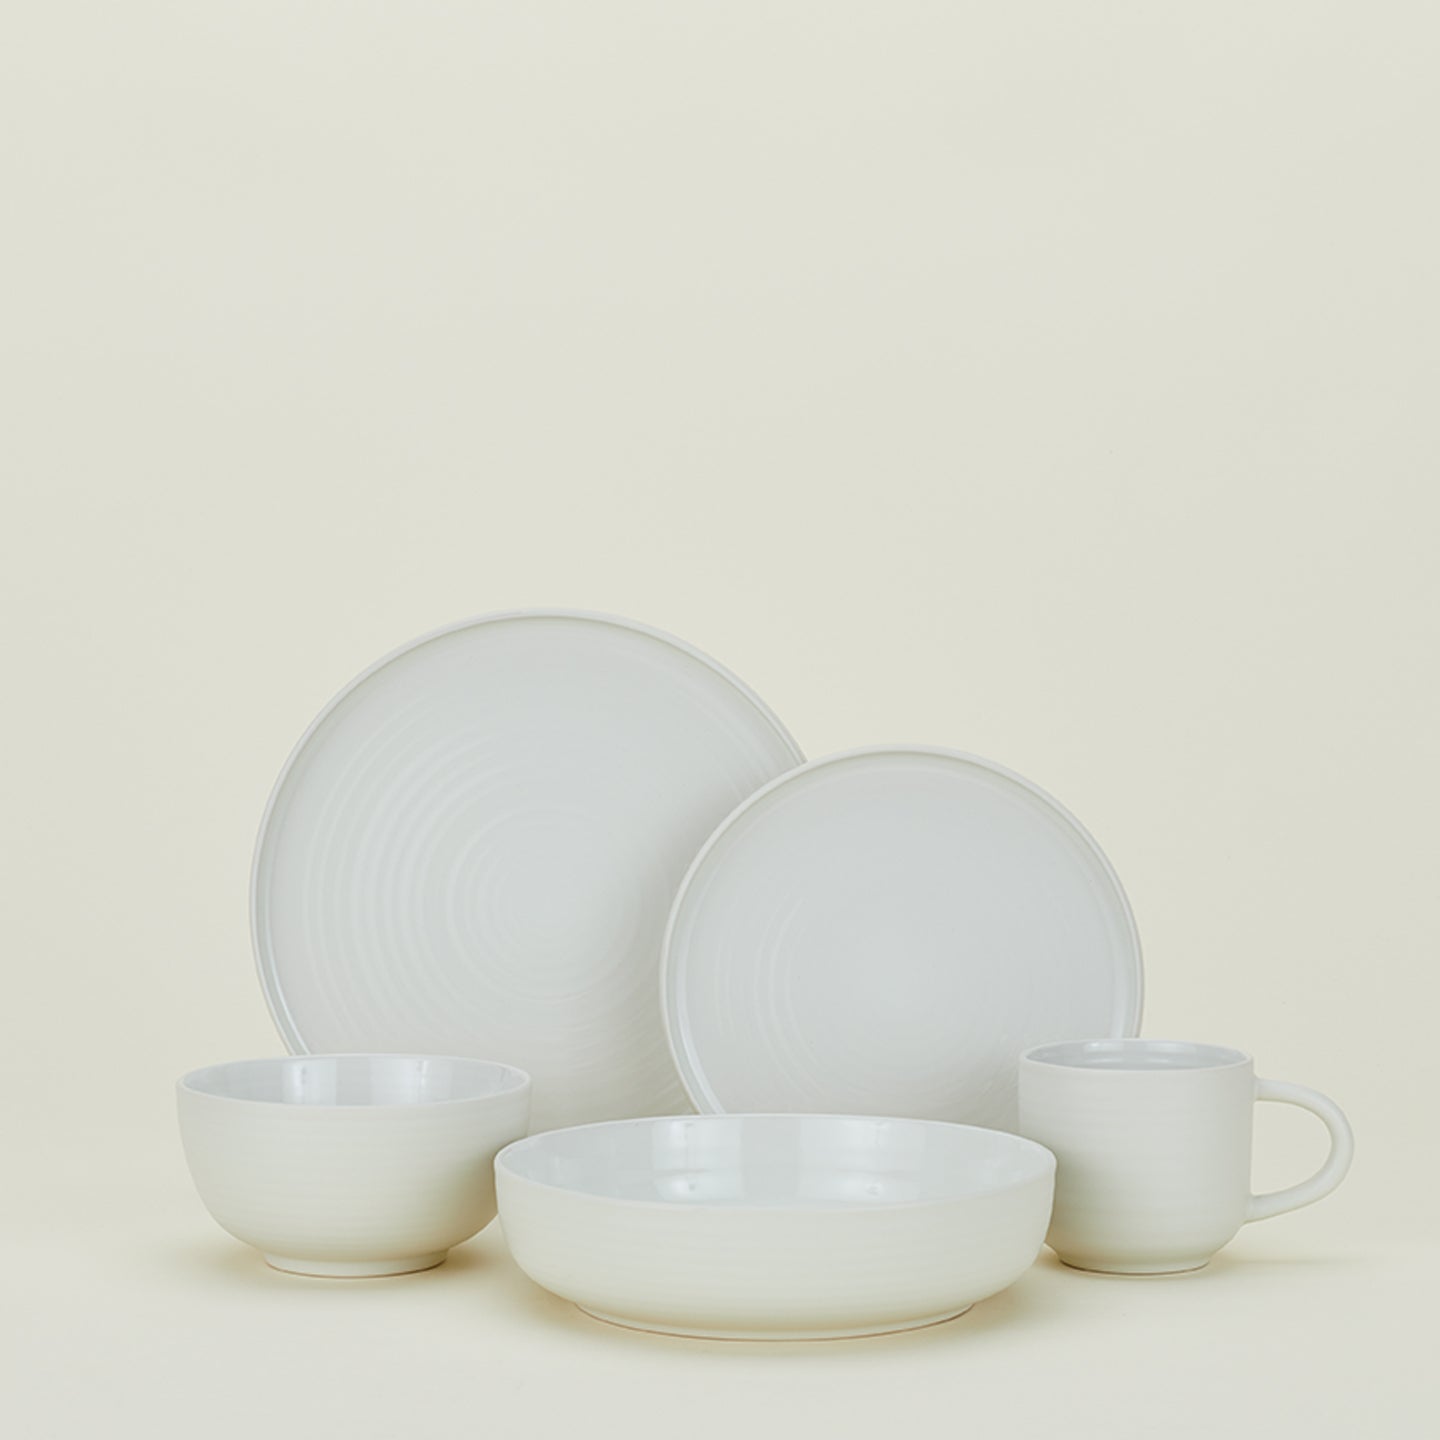 Minimalist and modern ceramic dinnerware set against a pale backdrop.